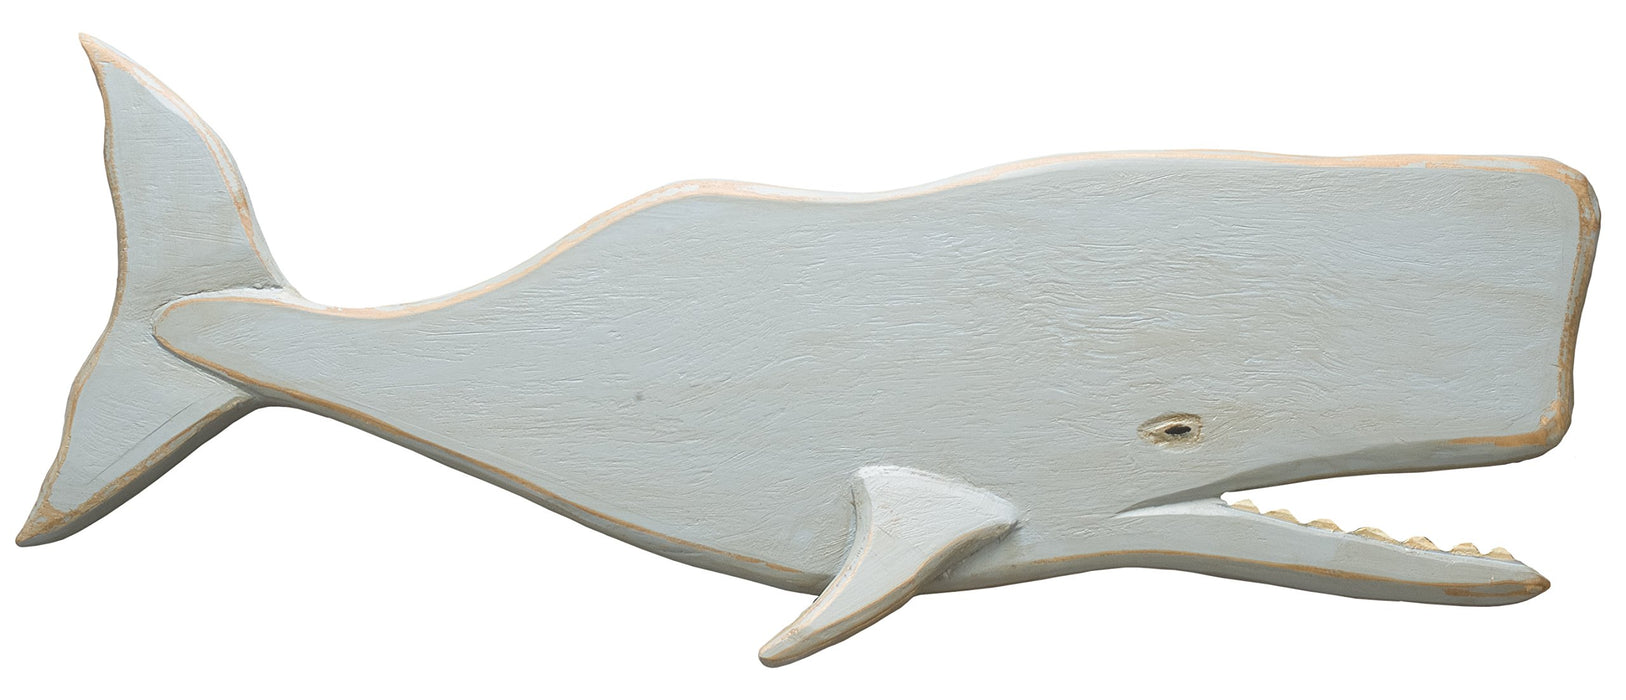 Primitives by Kathy 20588 Shaped Wooden Wall Art, 24.25 x 7.75Inches, Whale